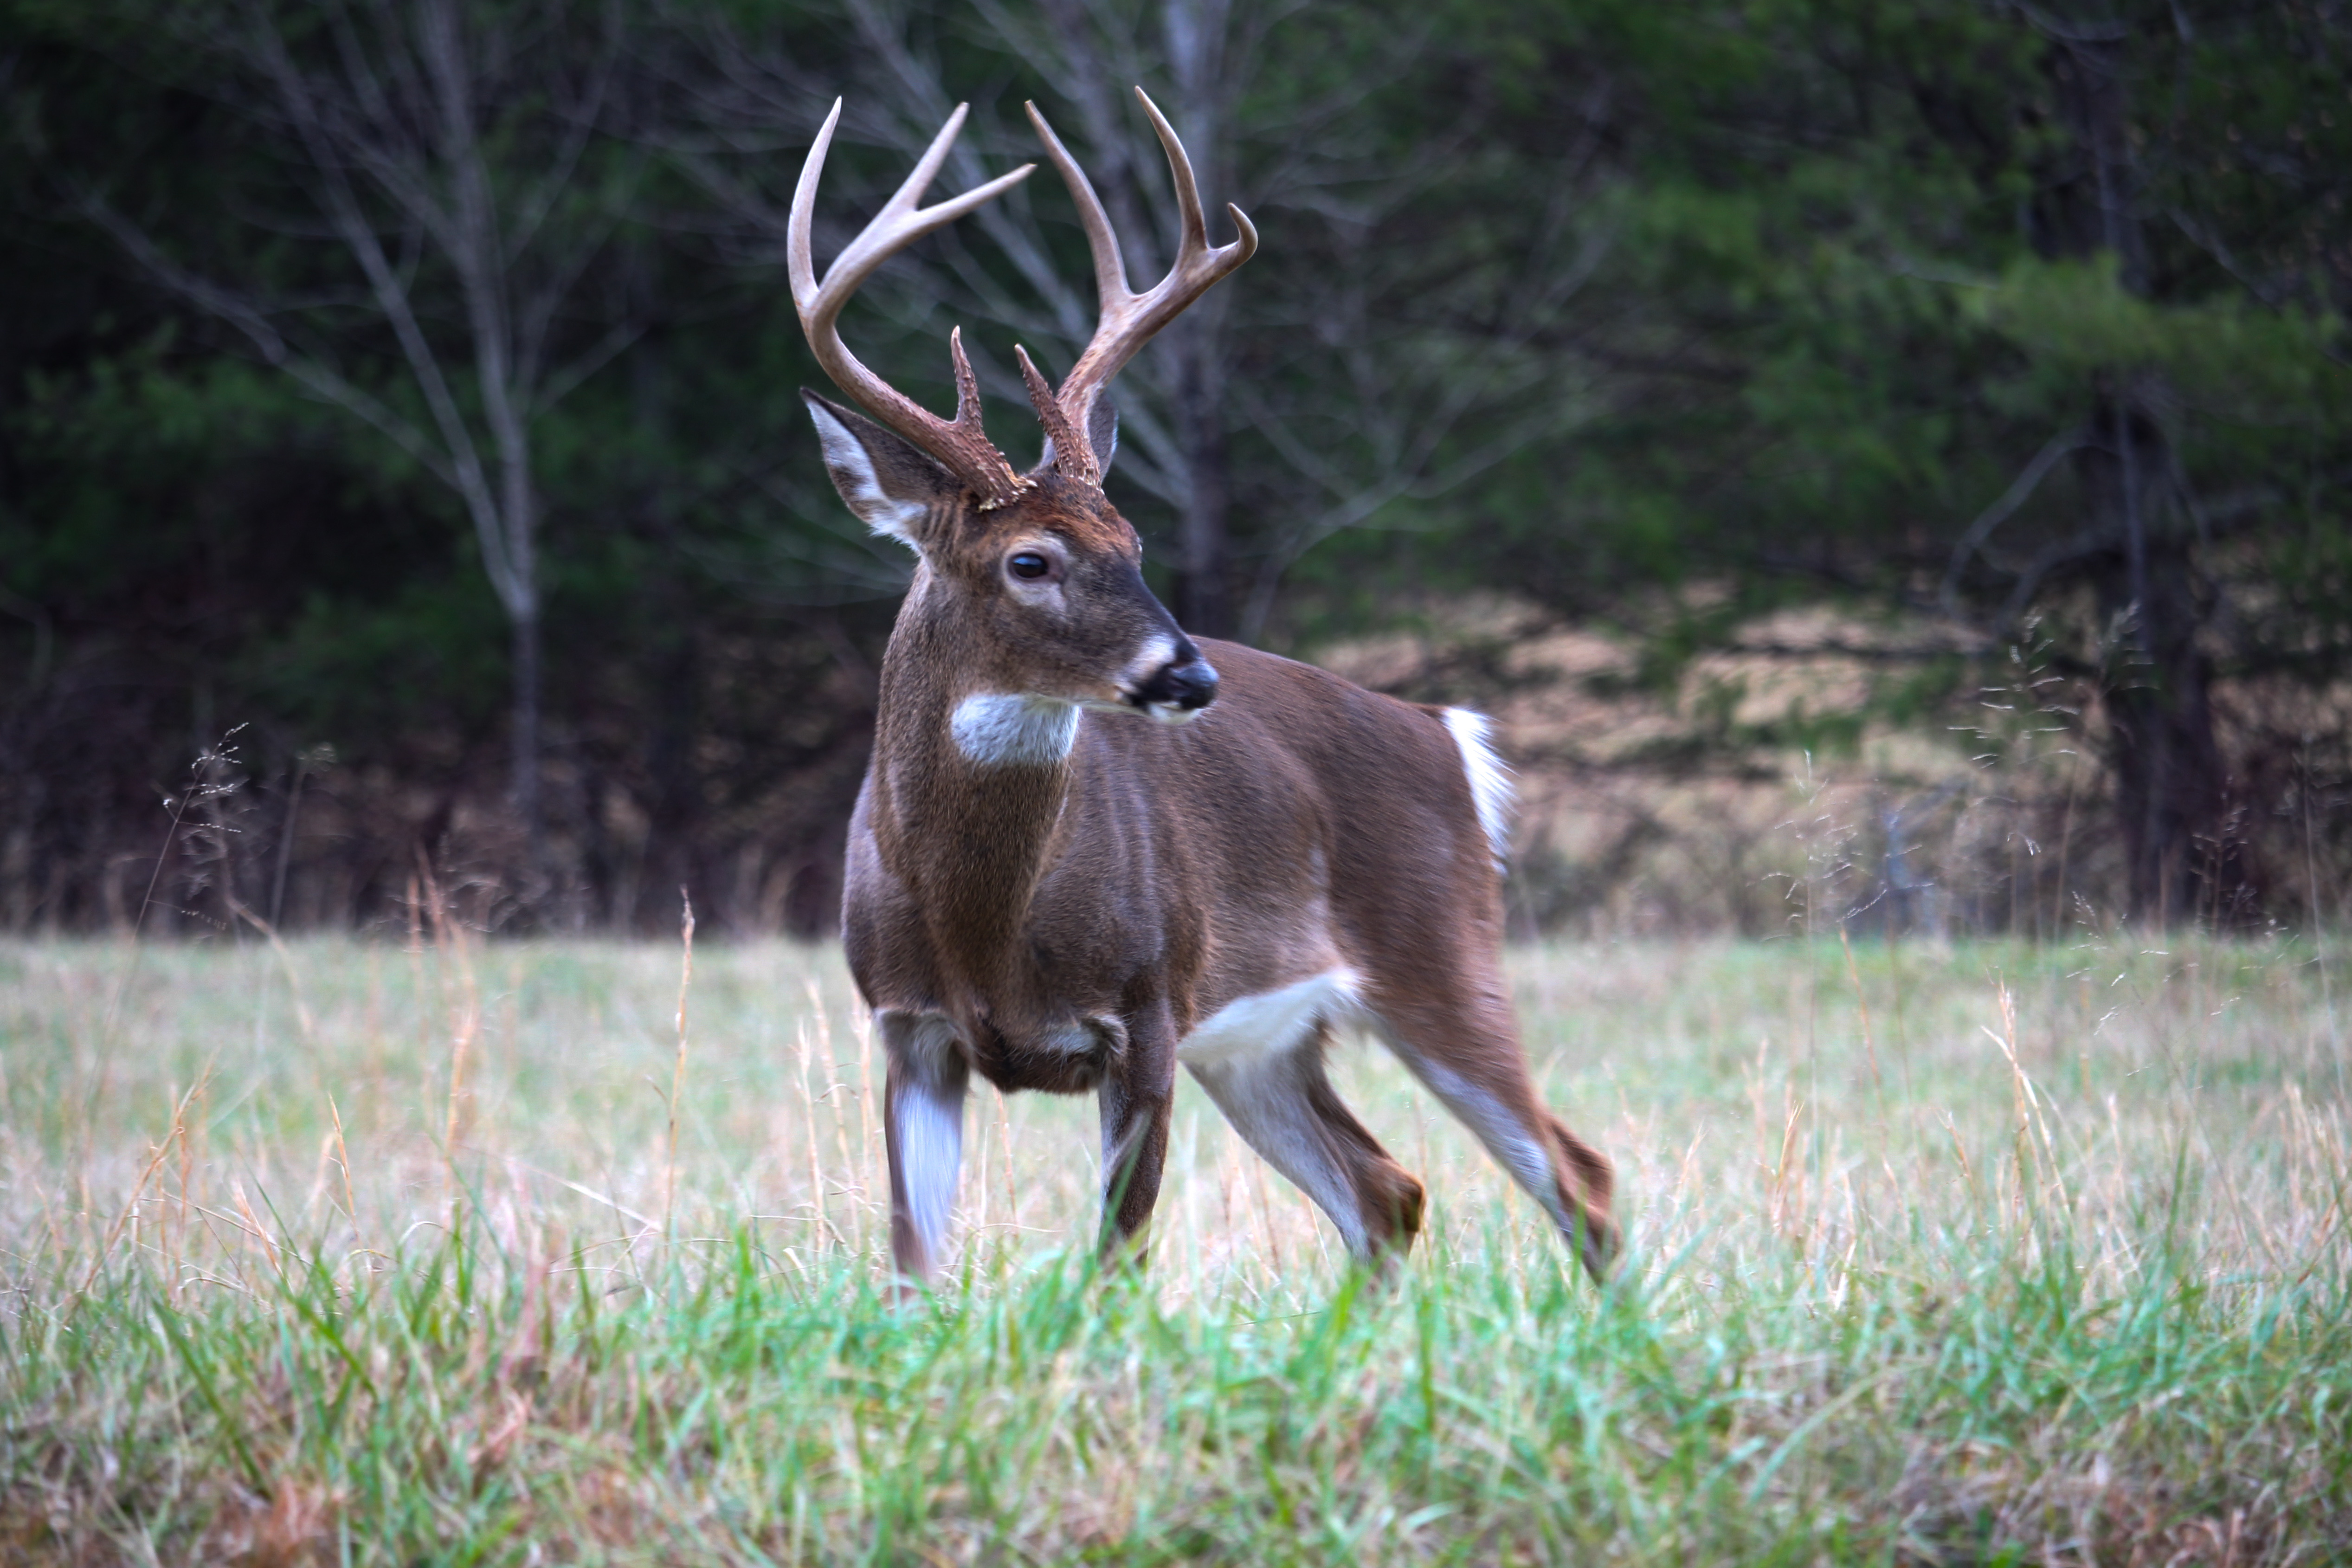 A whitetail deer in the field, hunter safety during the hunt concept. 